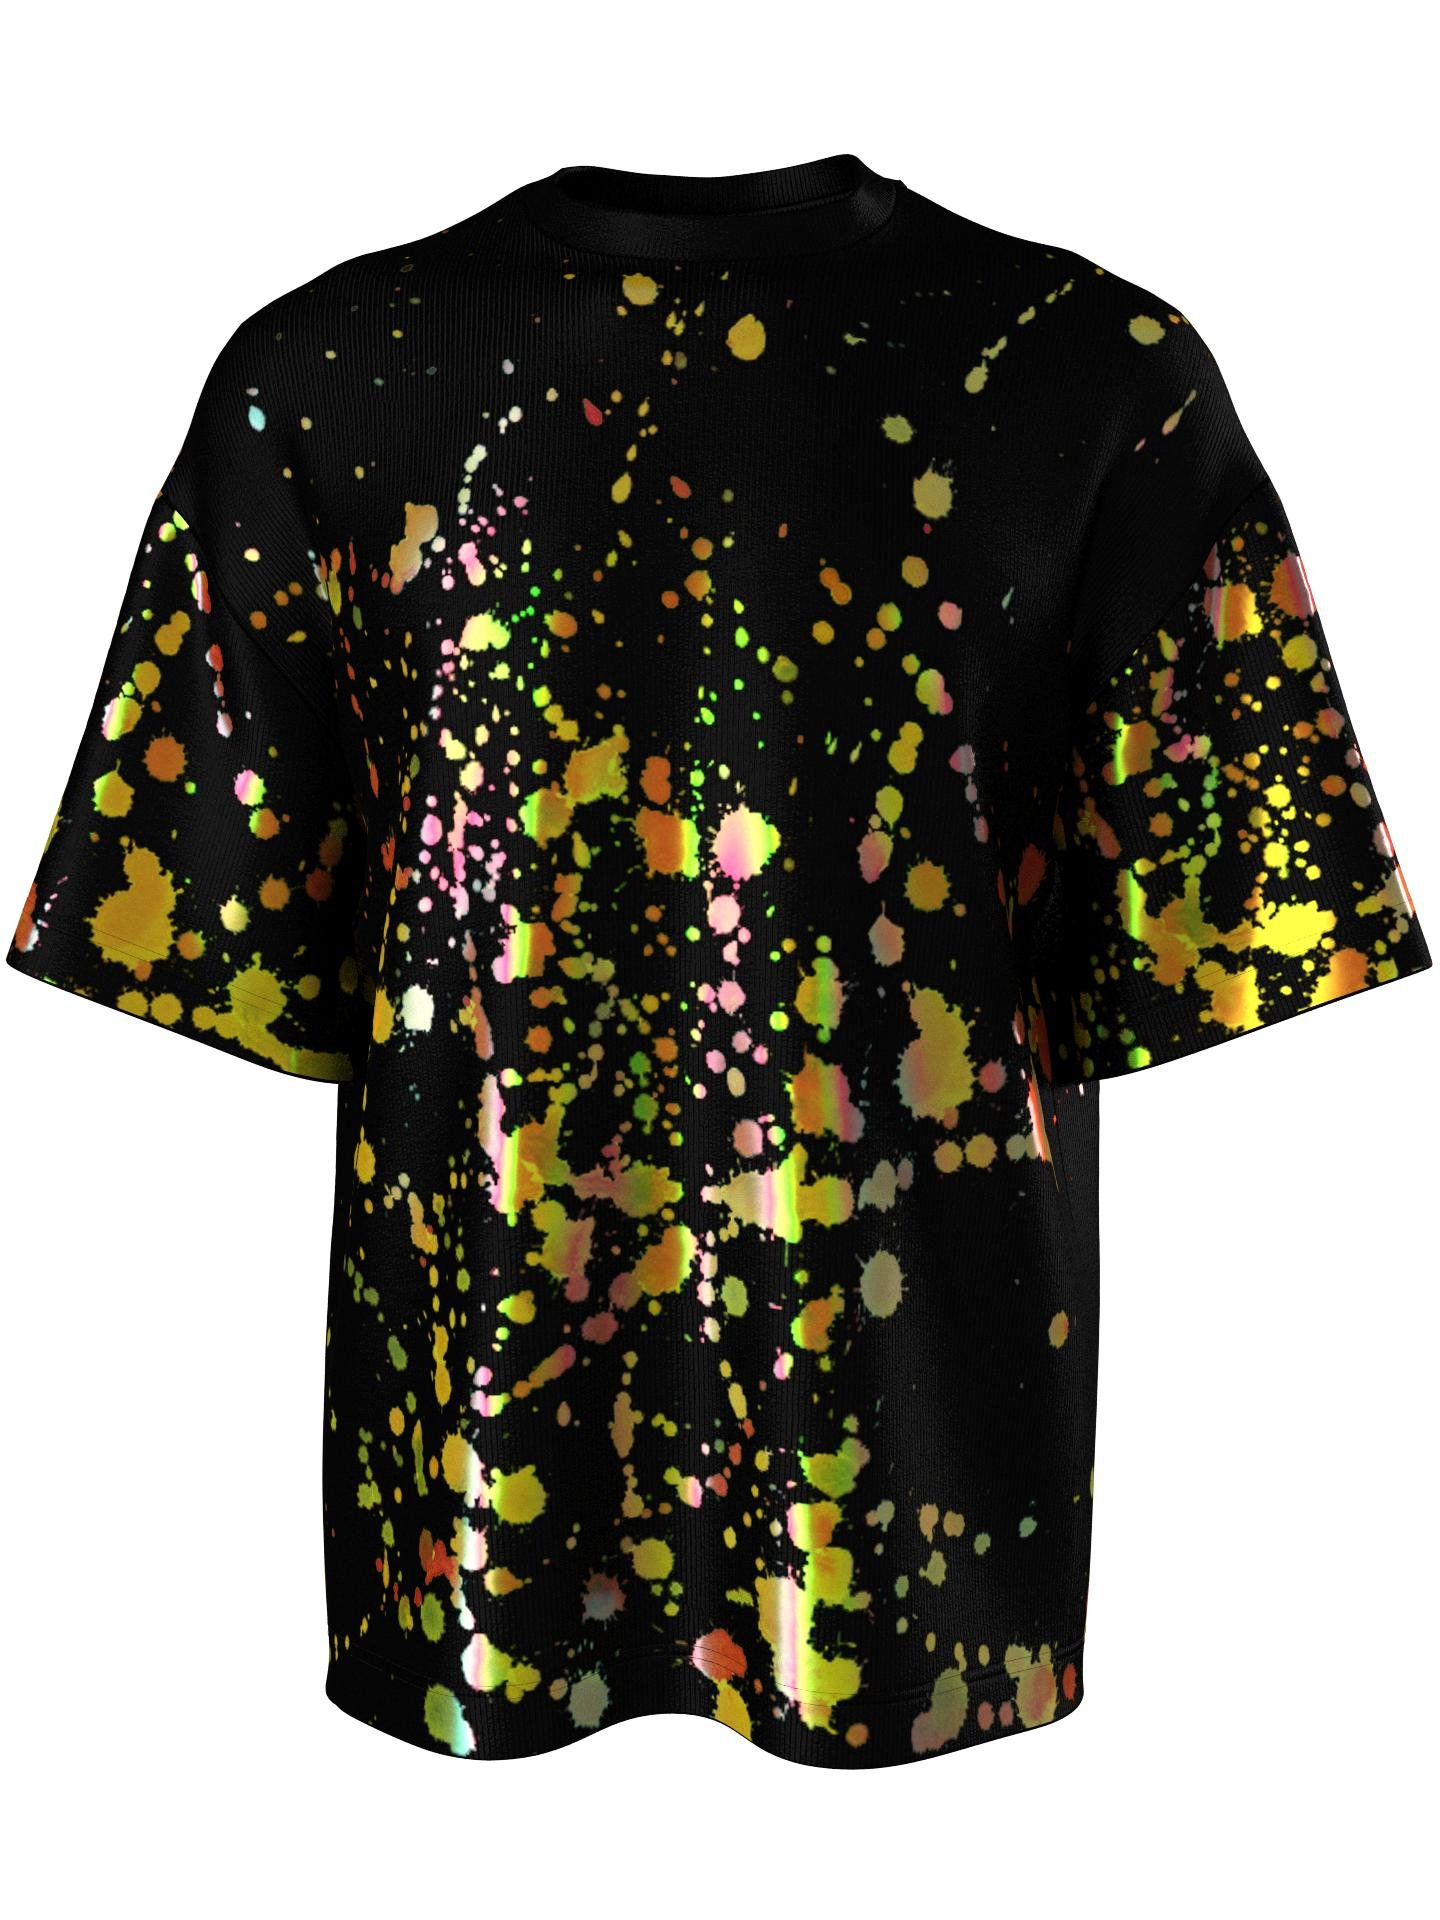 T-shirt with color splash black by SDGS INSPIRED COLLECTION